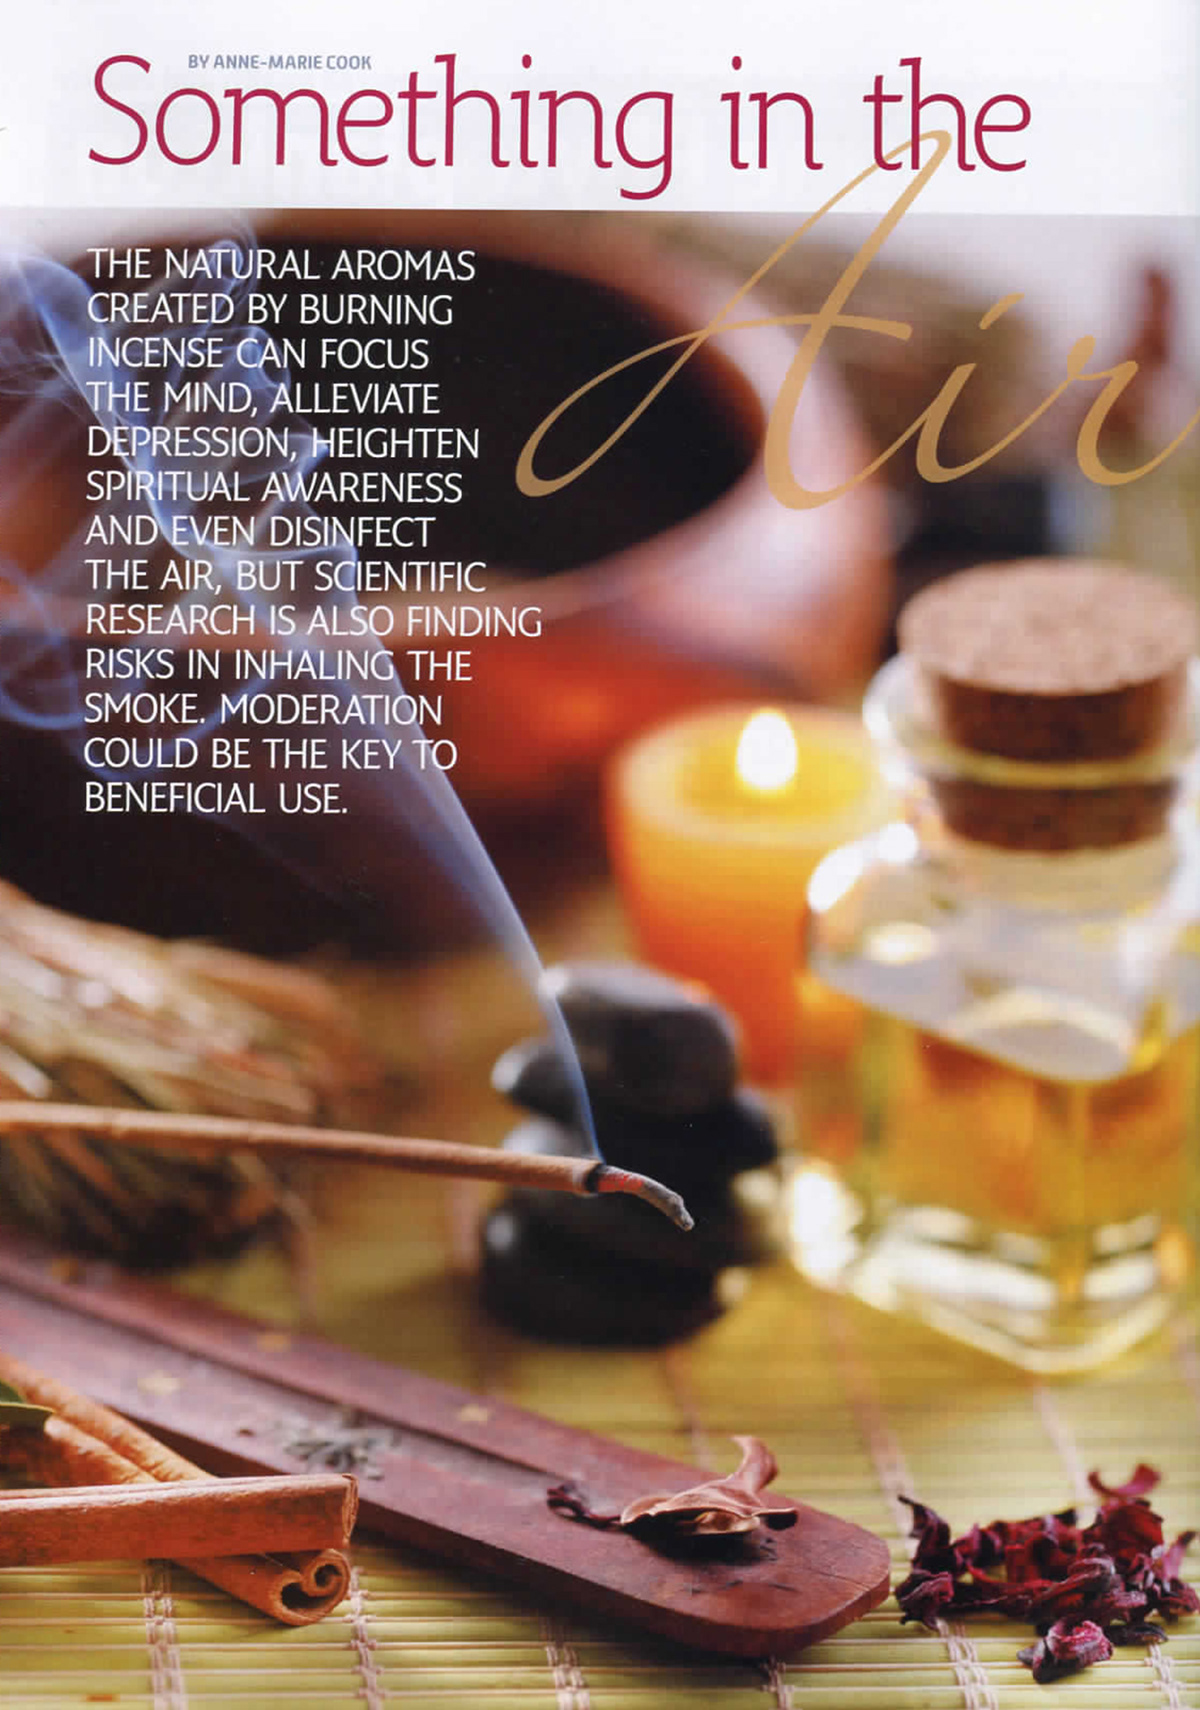 magazine Spa wellbeing lifestyle gift guide